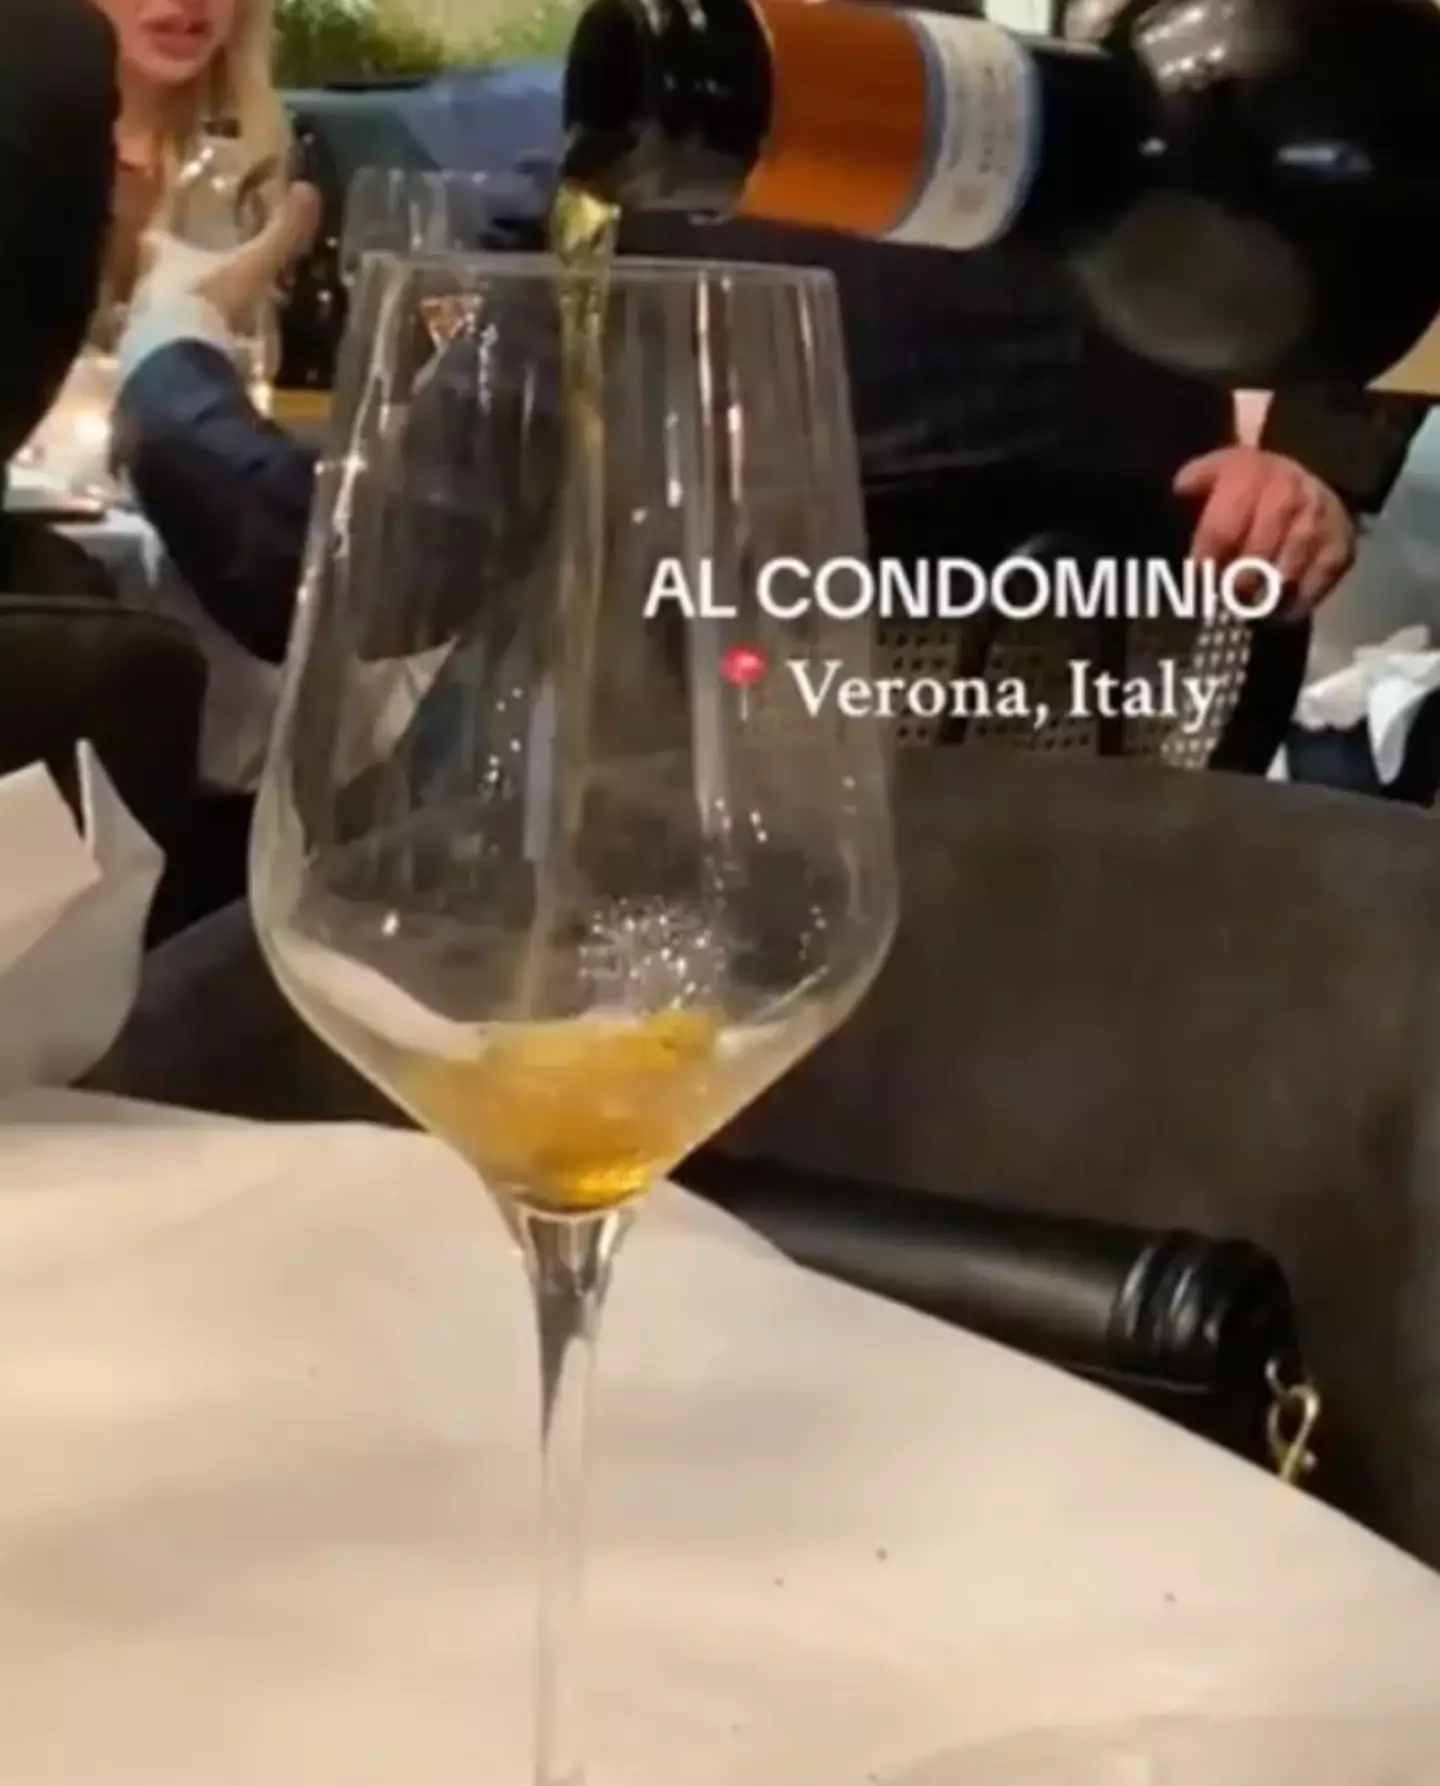 You can get a free bottle of wine if you hand over your phone. (TikTok/@leca.ursachi)